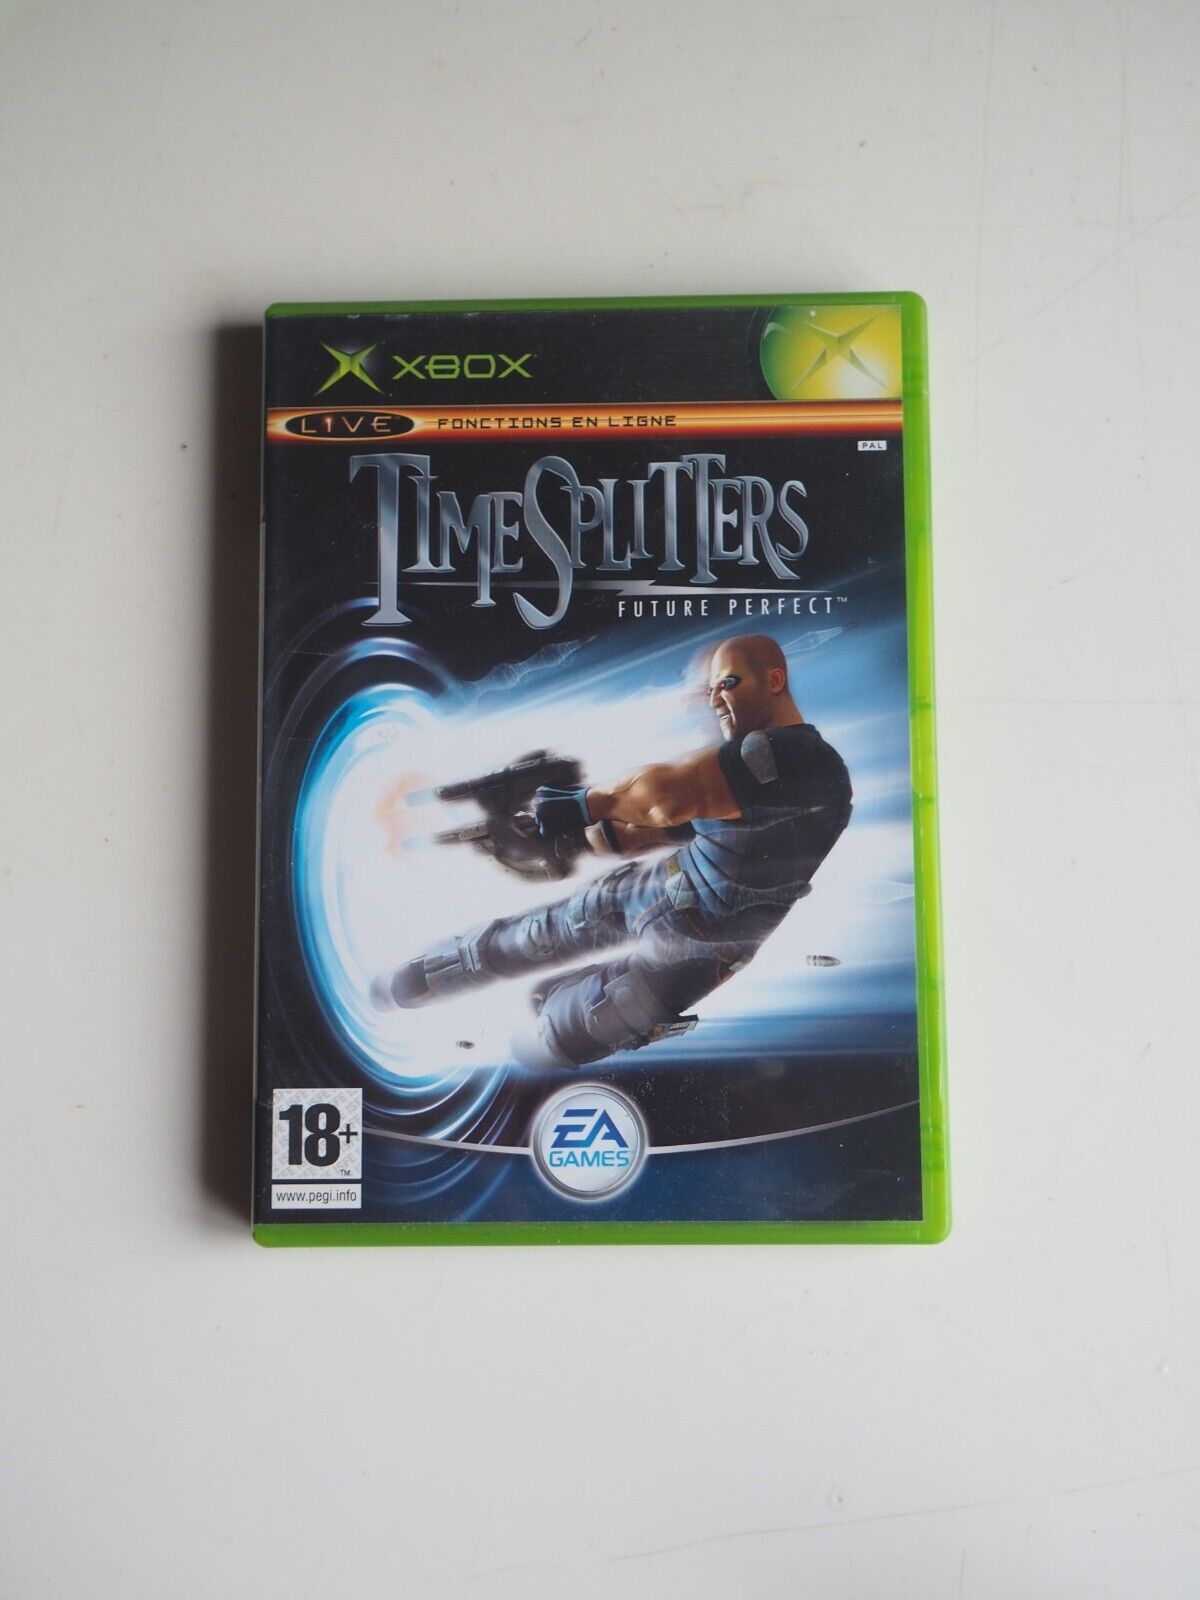 Time Splitters Future Perfect sur Xbox (complet)